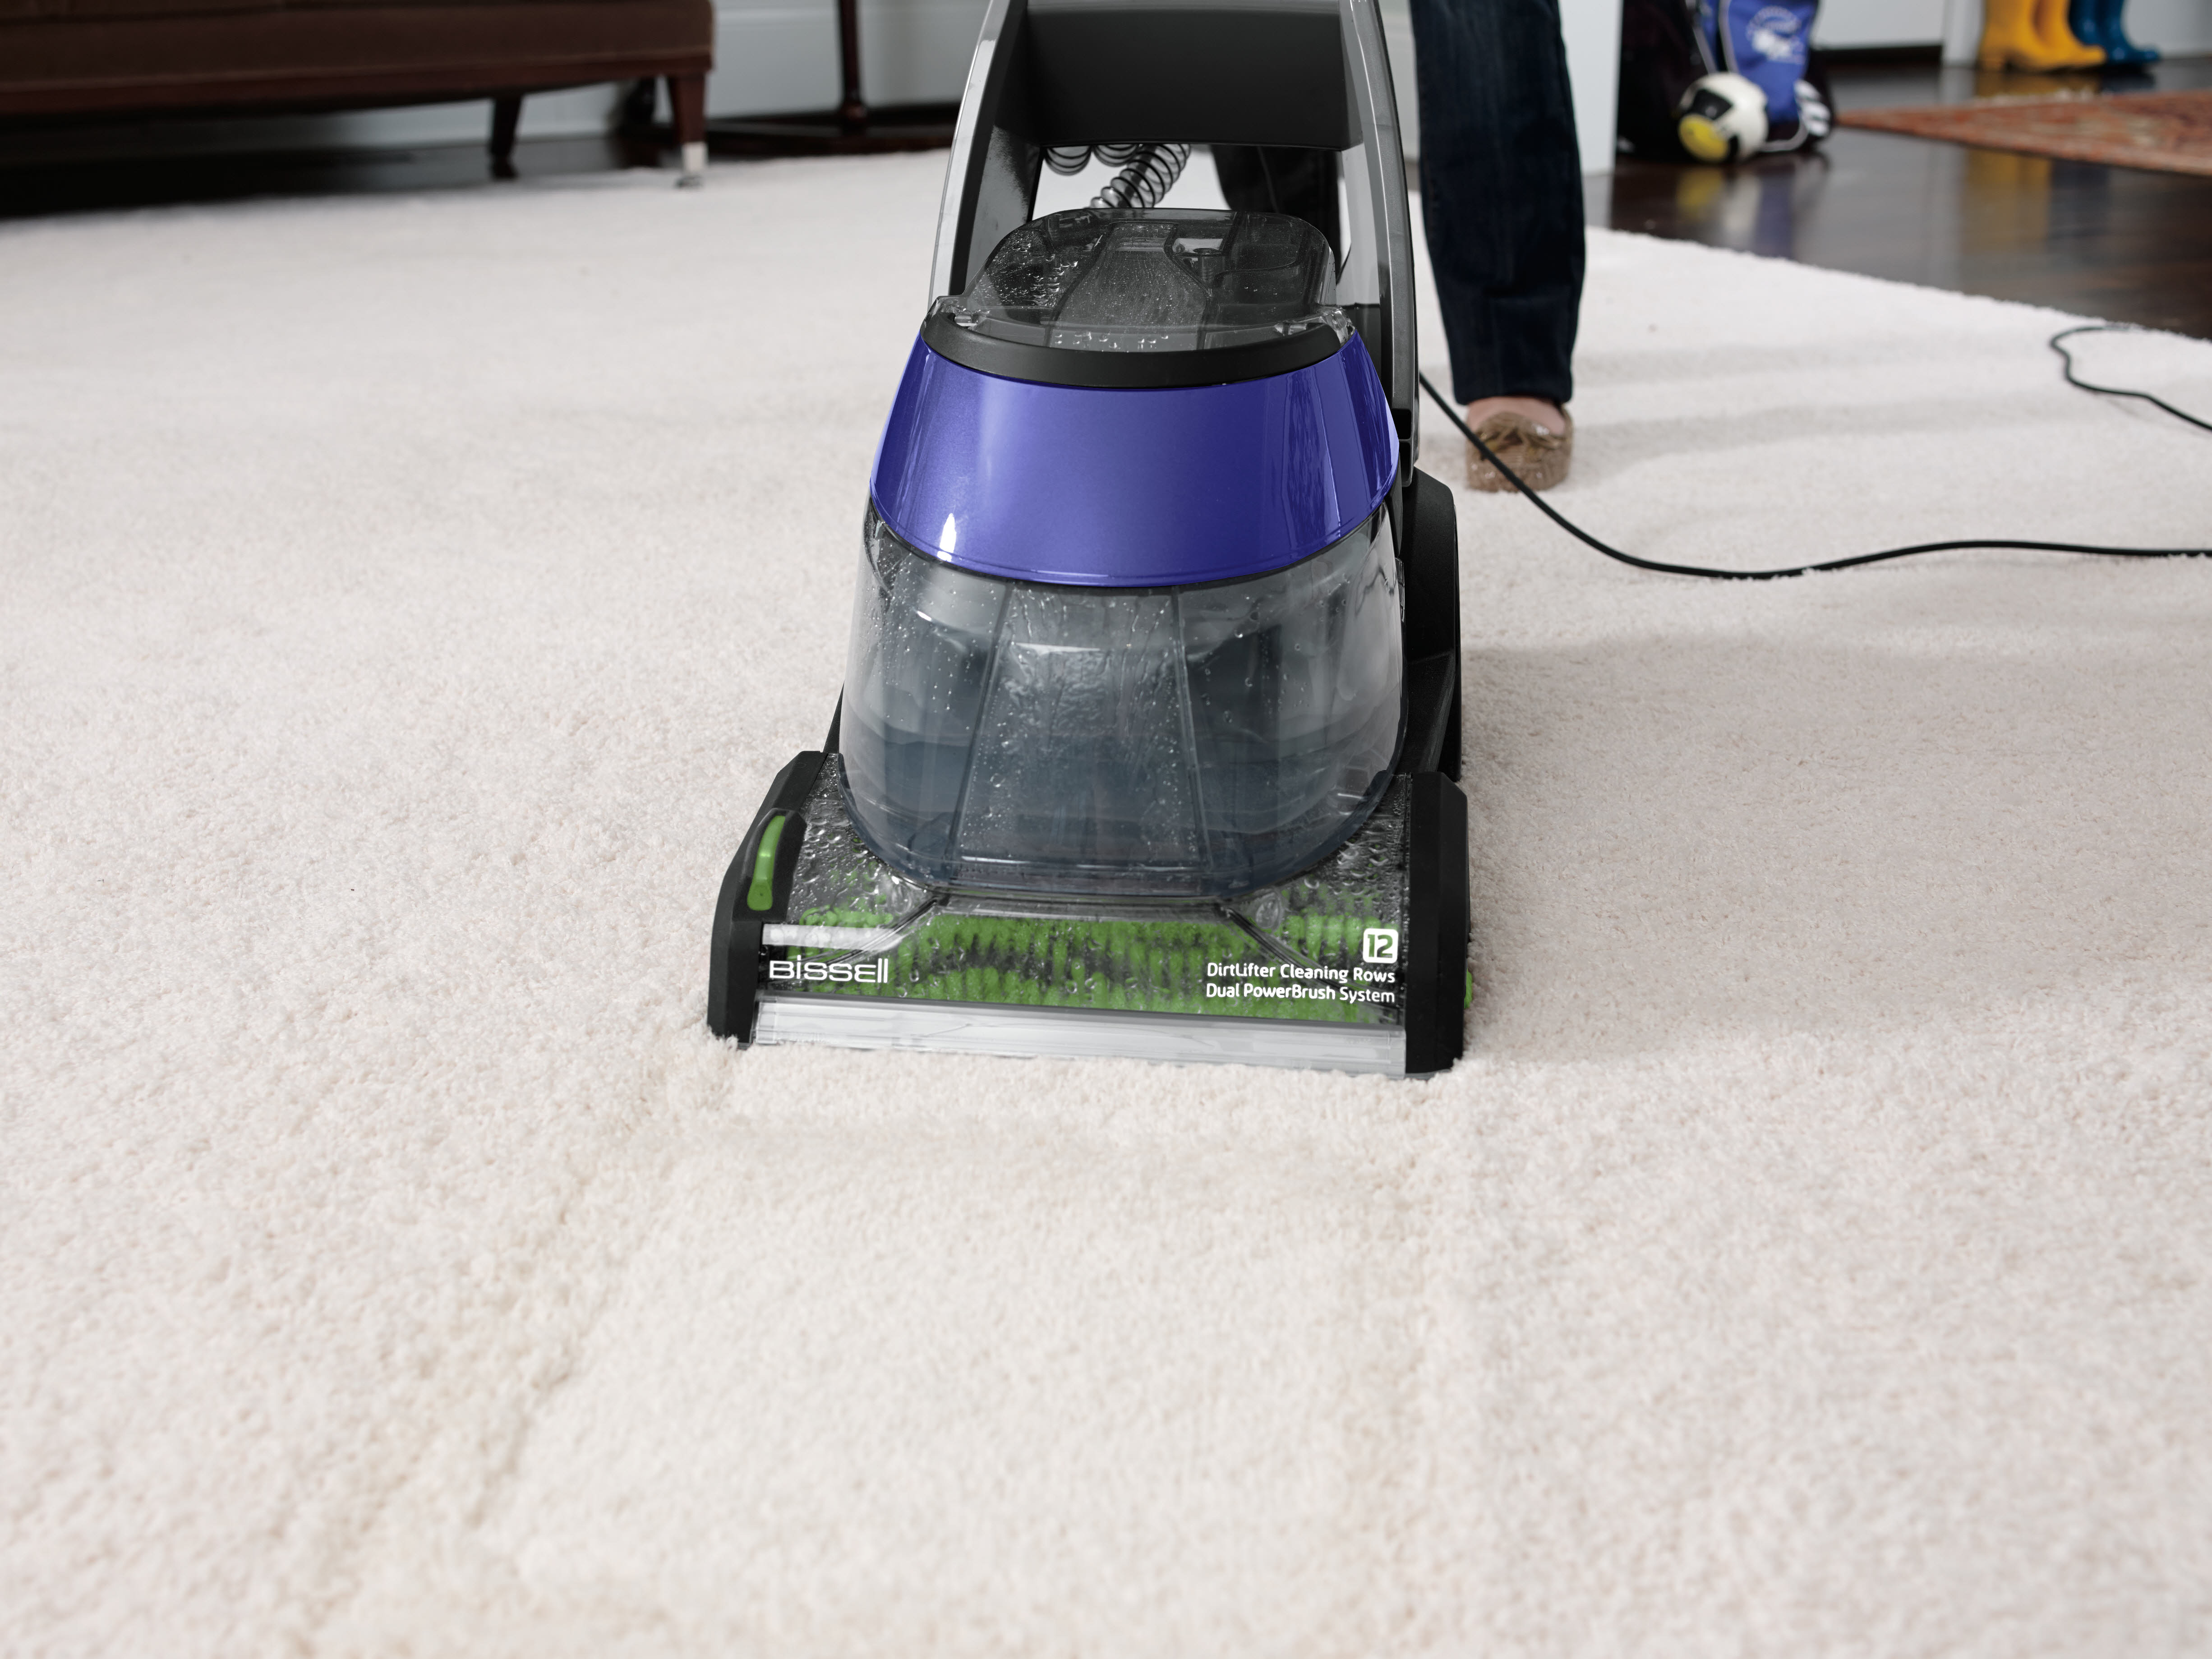 Bissell 36Z9 DeepClean Deluxe Pet Full Size Upright Carpet Cleaner and Shampooer - image 5 of 11